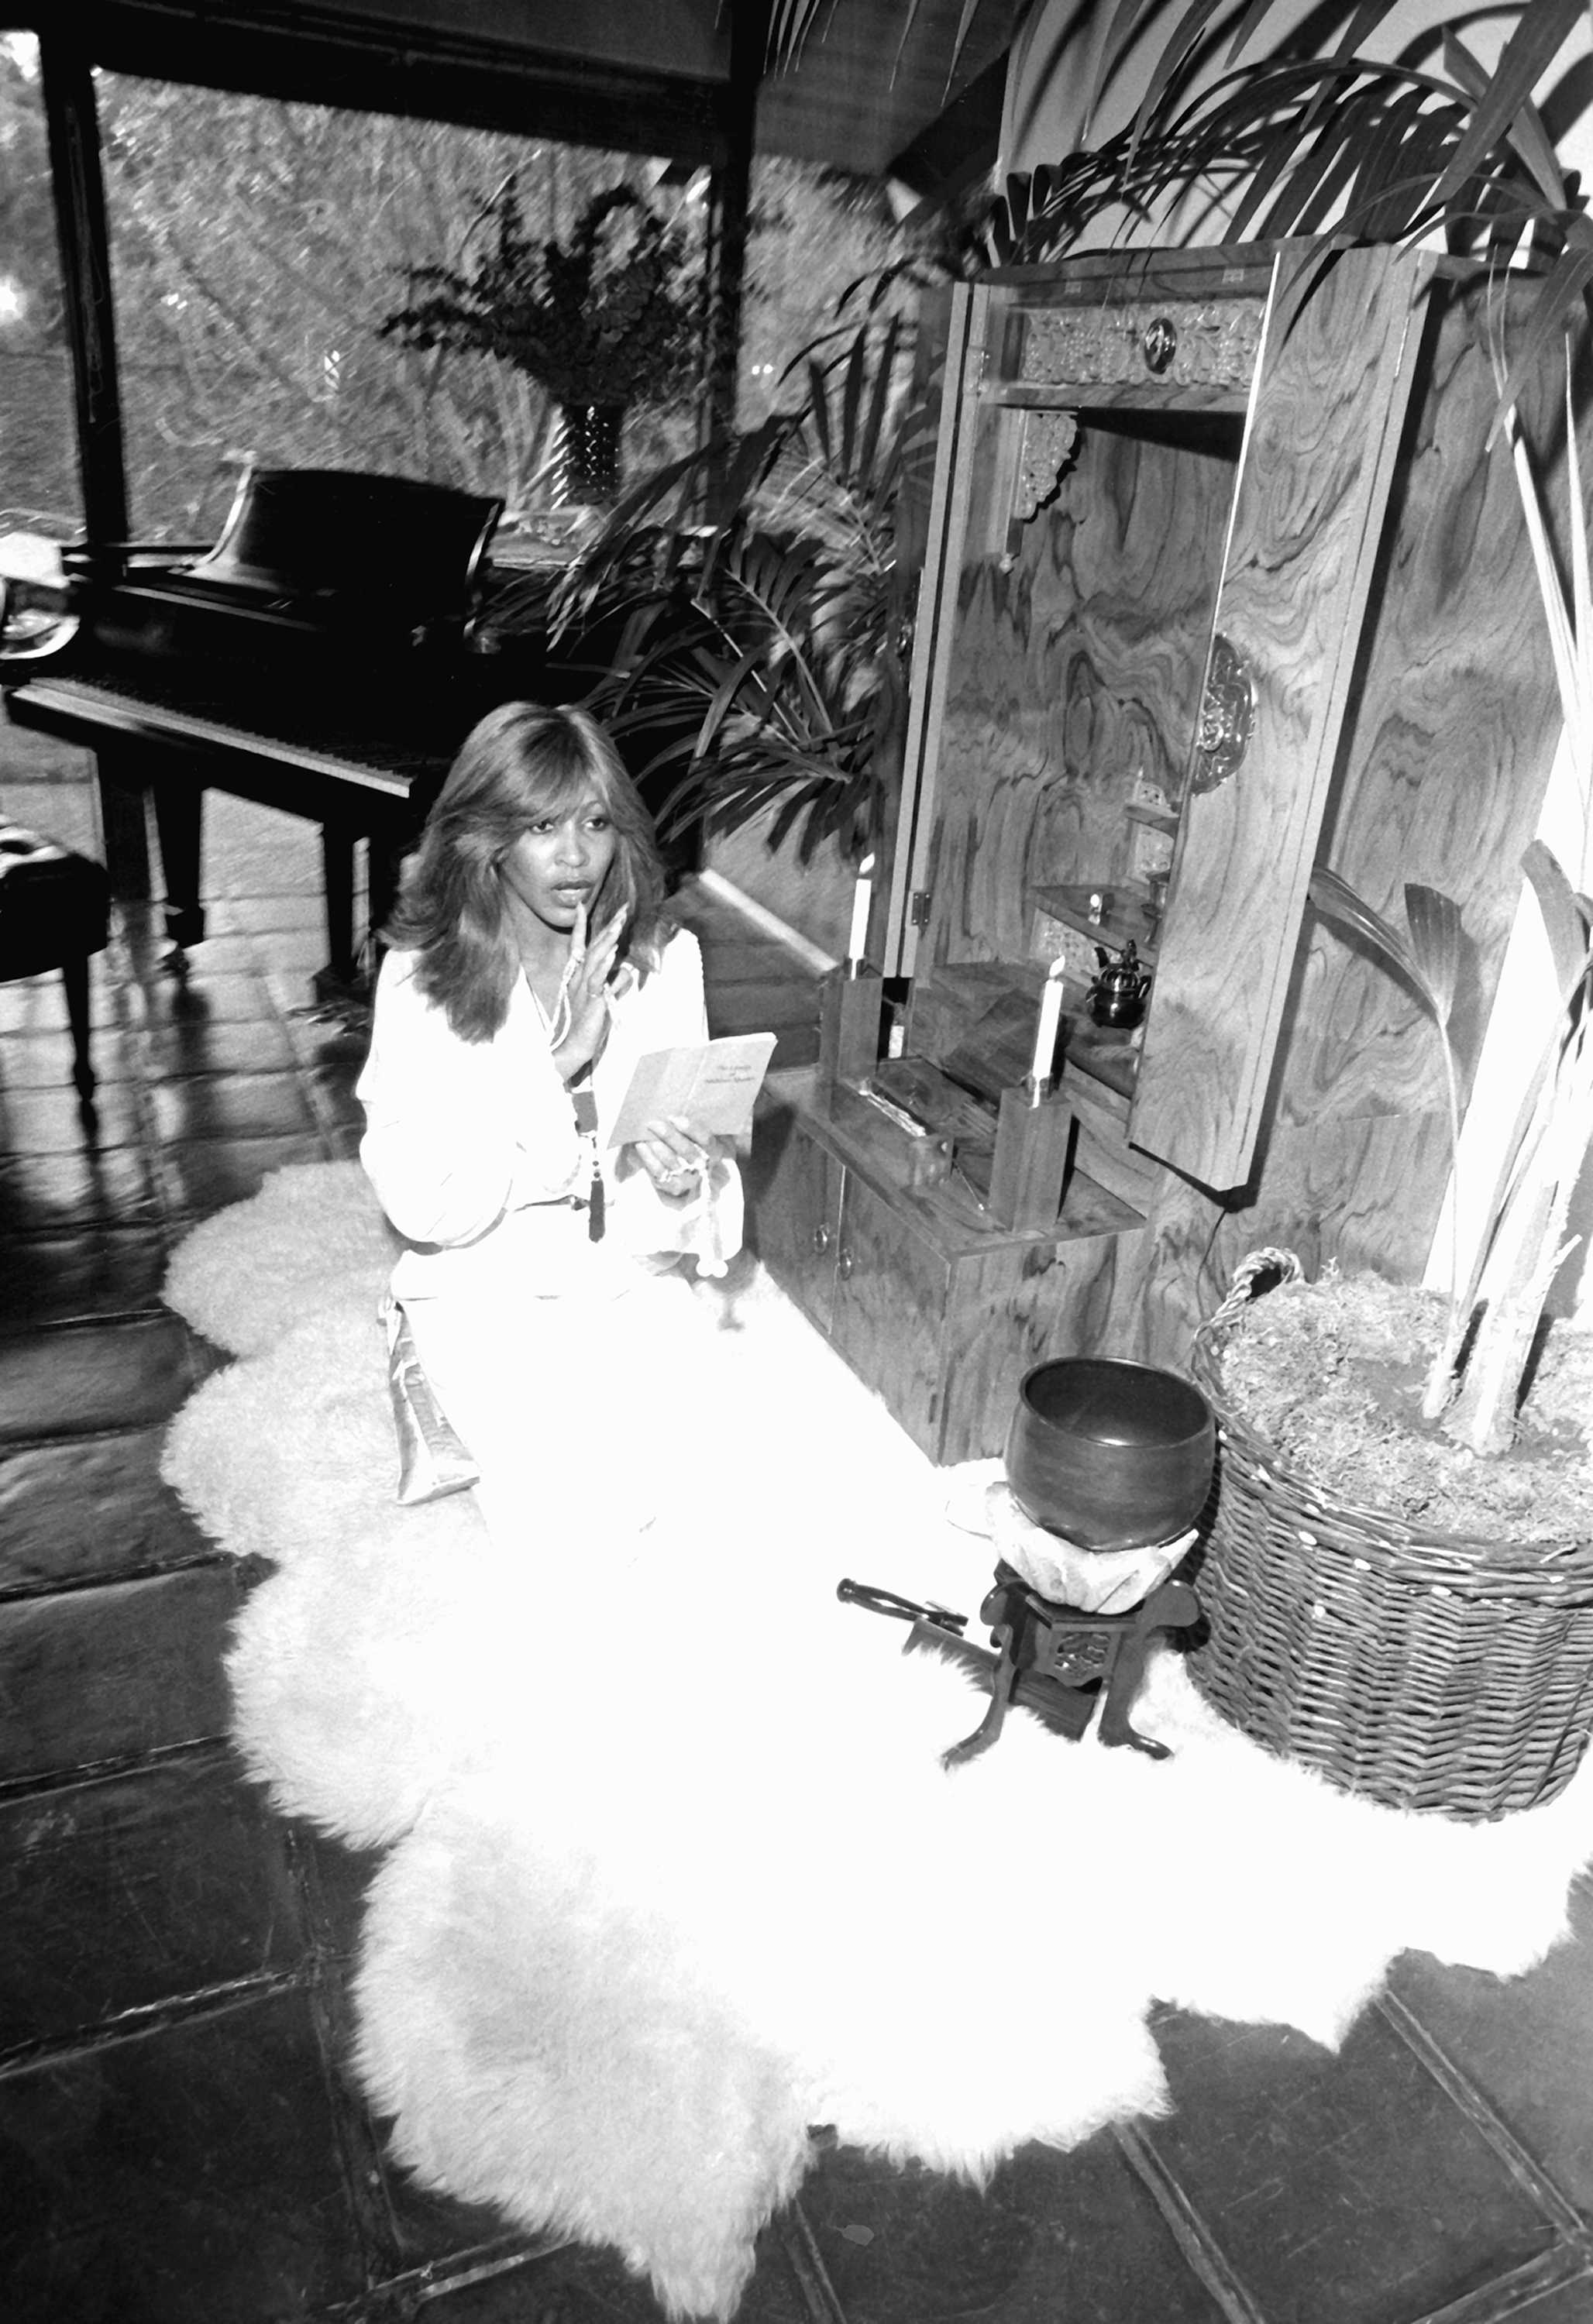 Black and white photograph of Tina Turner performing a Buddhist ritual at her home altar